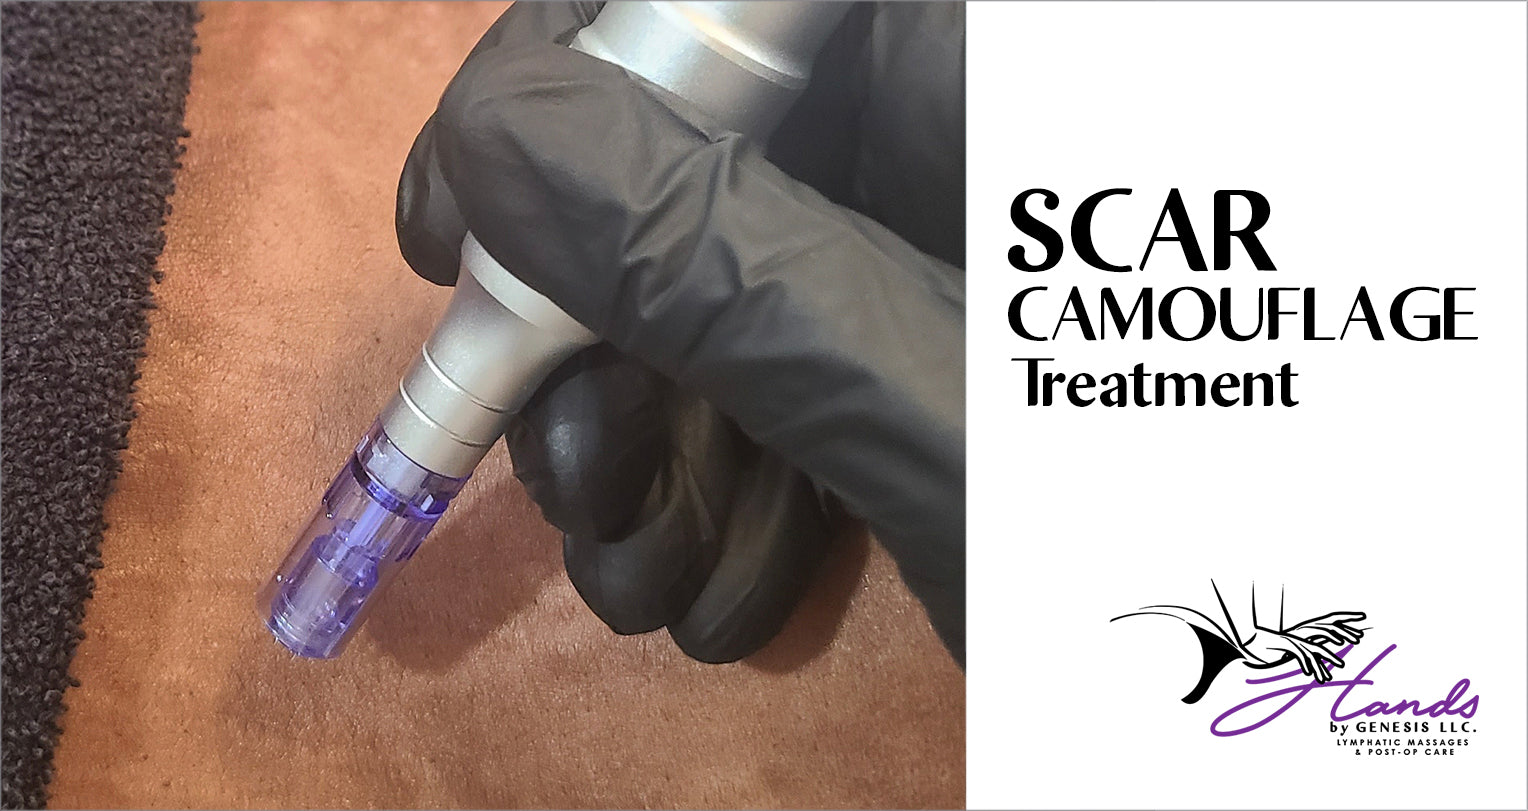 Scar camouflage treatment Brooklyn NY - Hands by Genesis